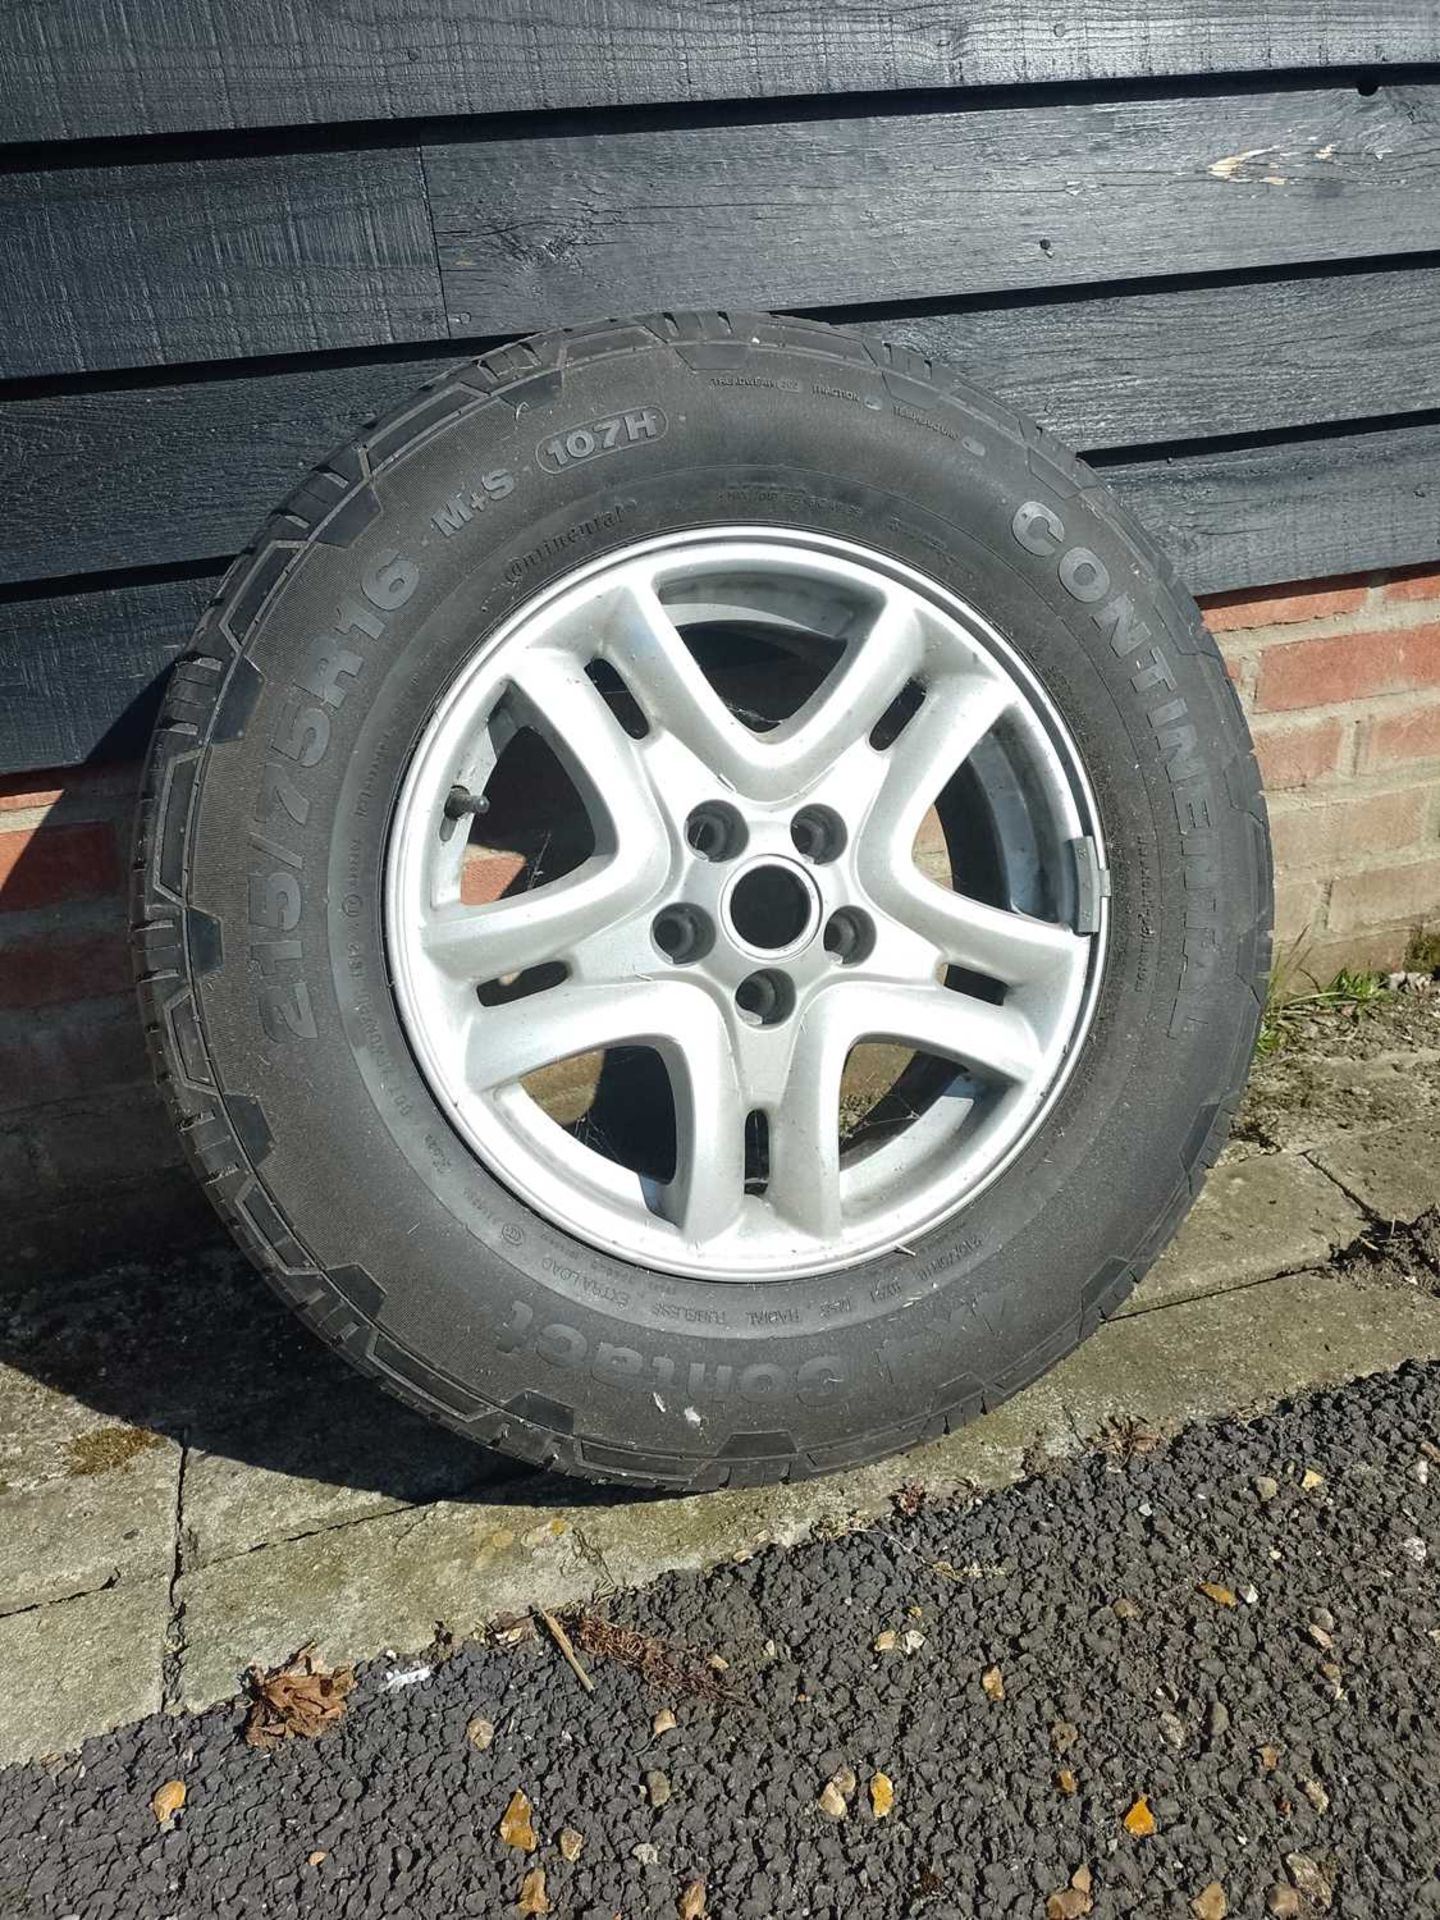 L/R Freeland STD4 Spare Wheel with Tyre (215 / 75R16 M+S 107H Continental 4 x 4 Contact Tyre) ( - Image 2 of 2